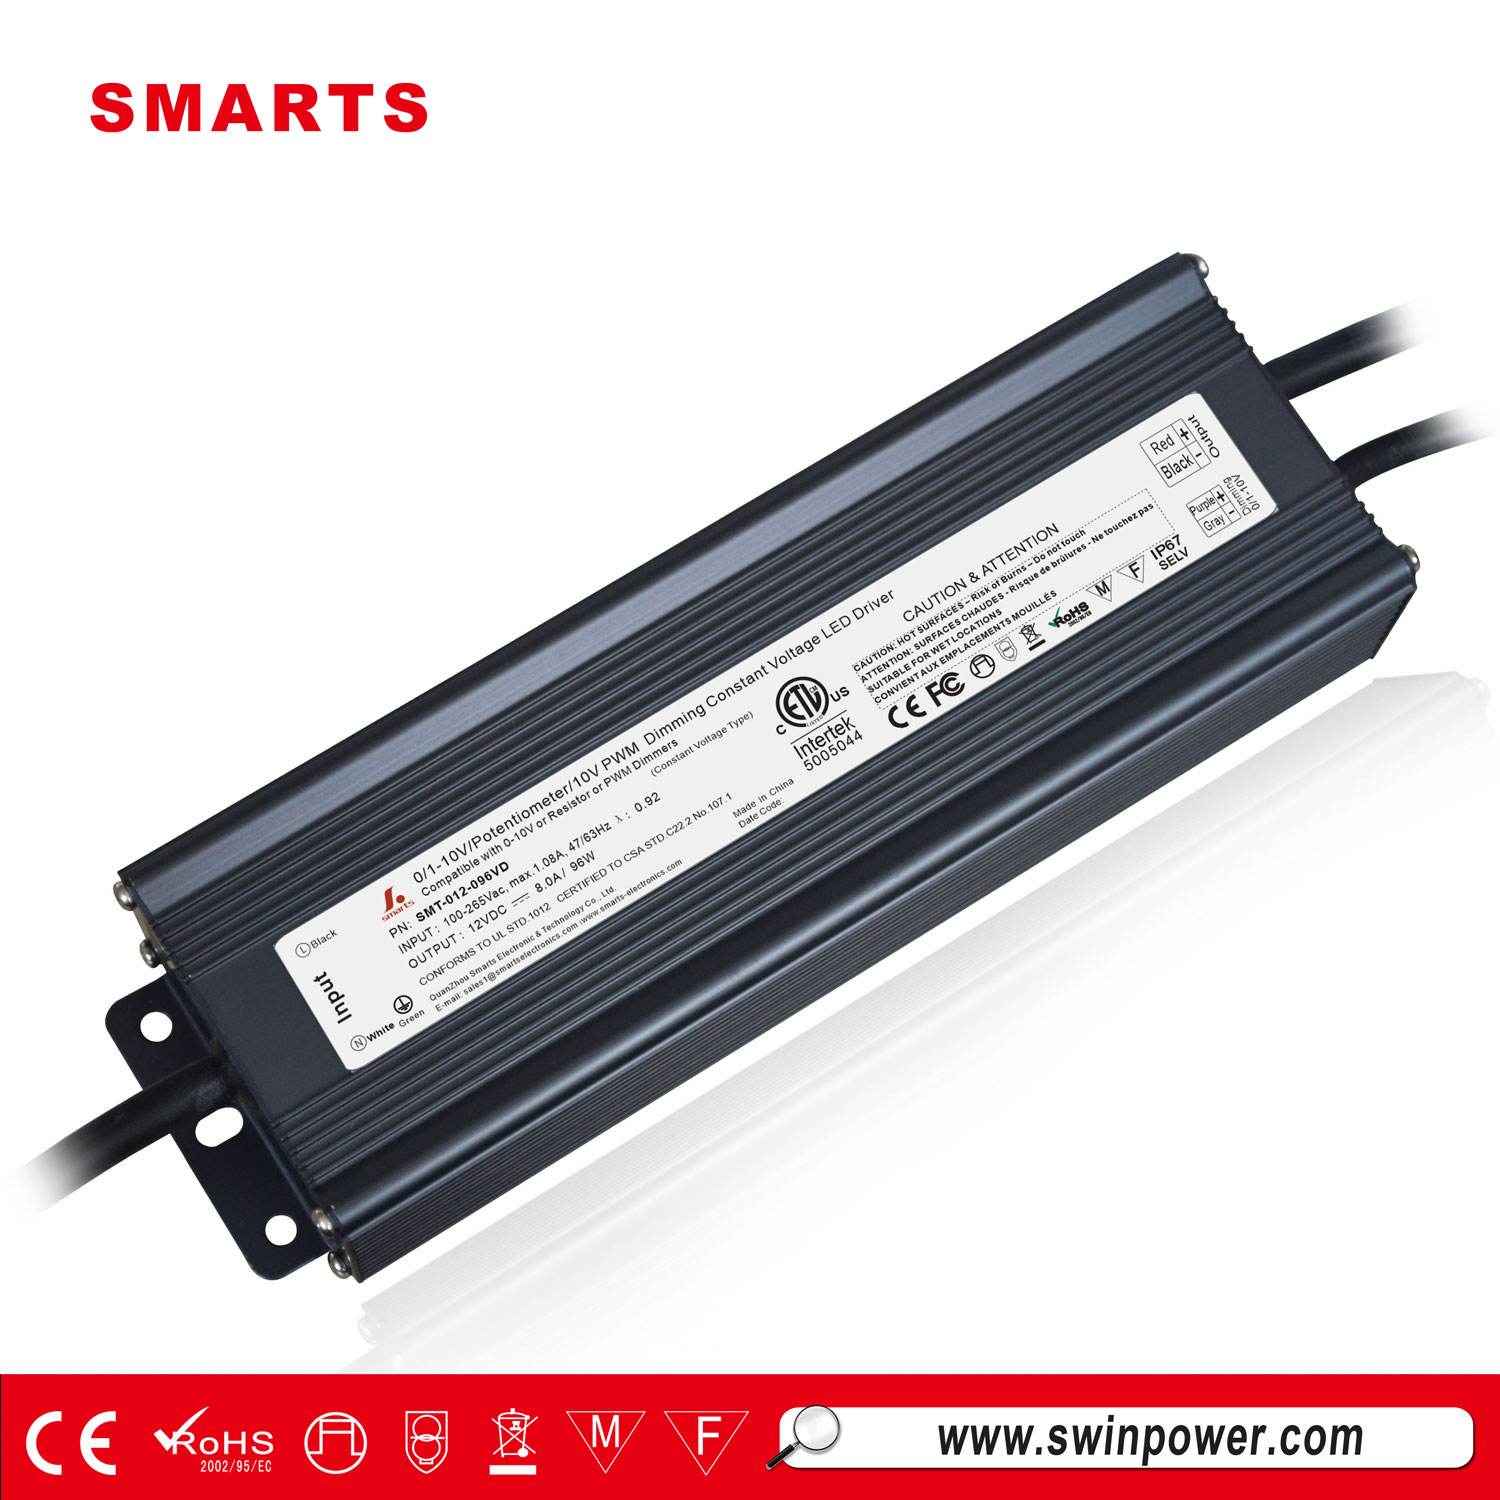 0-10V dimmable led power supply